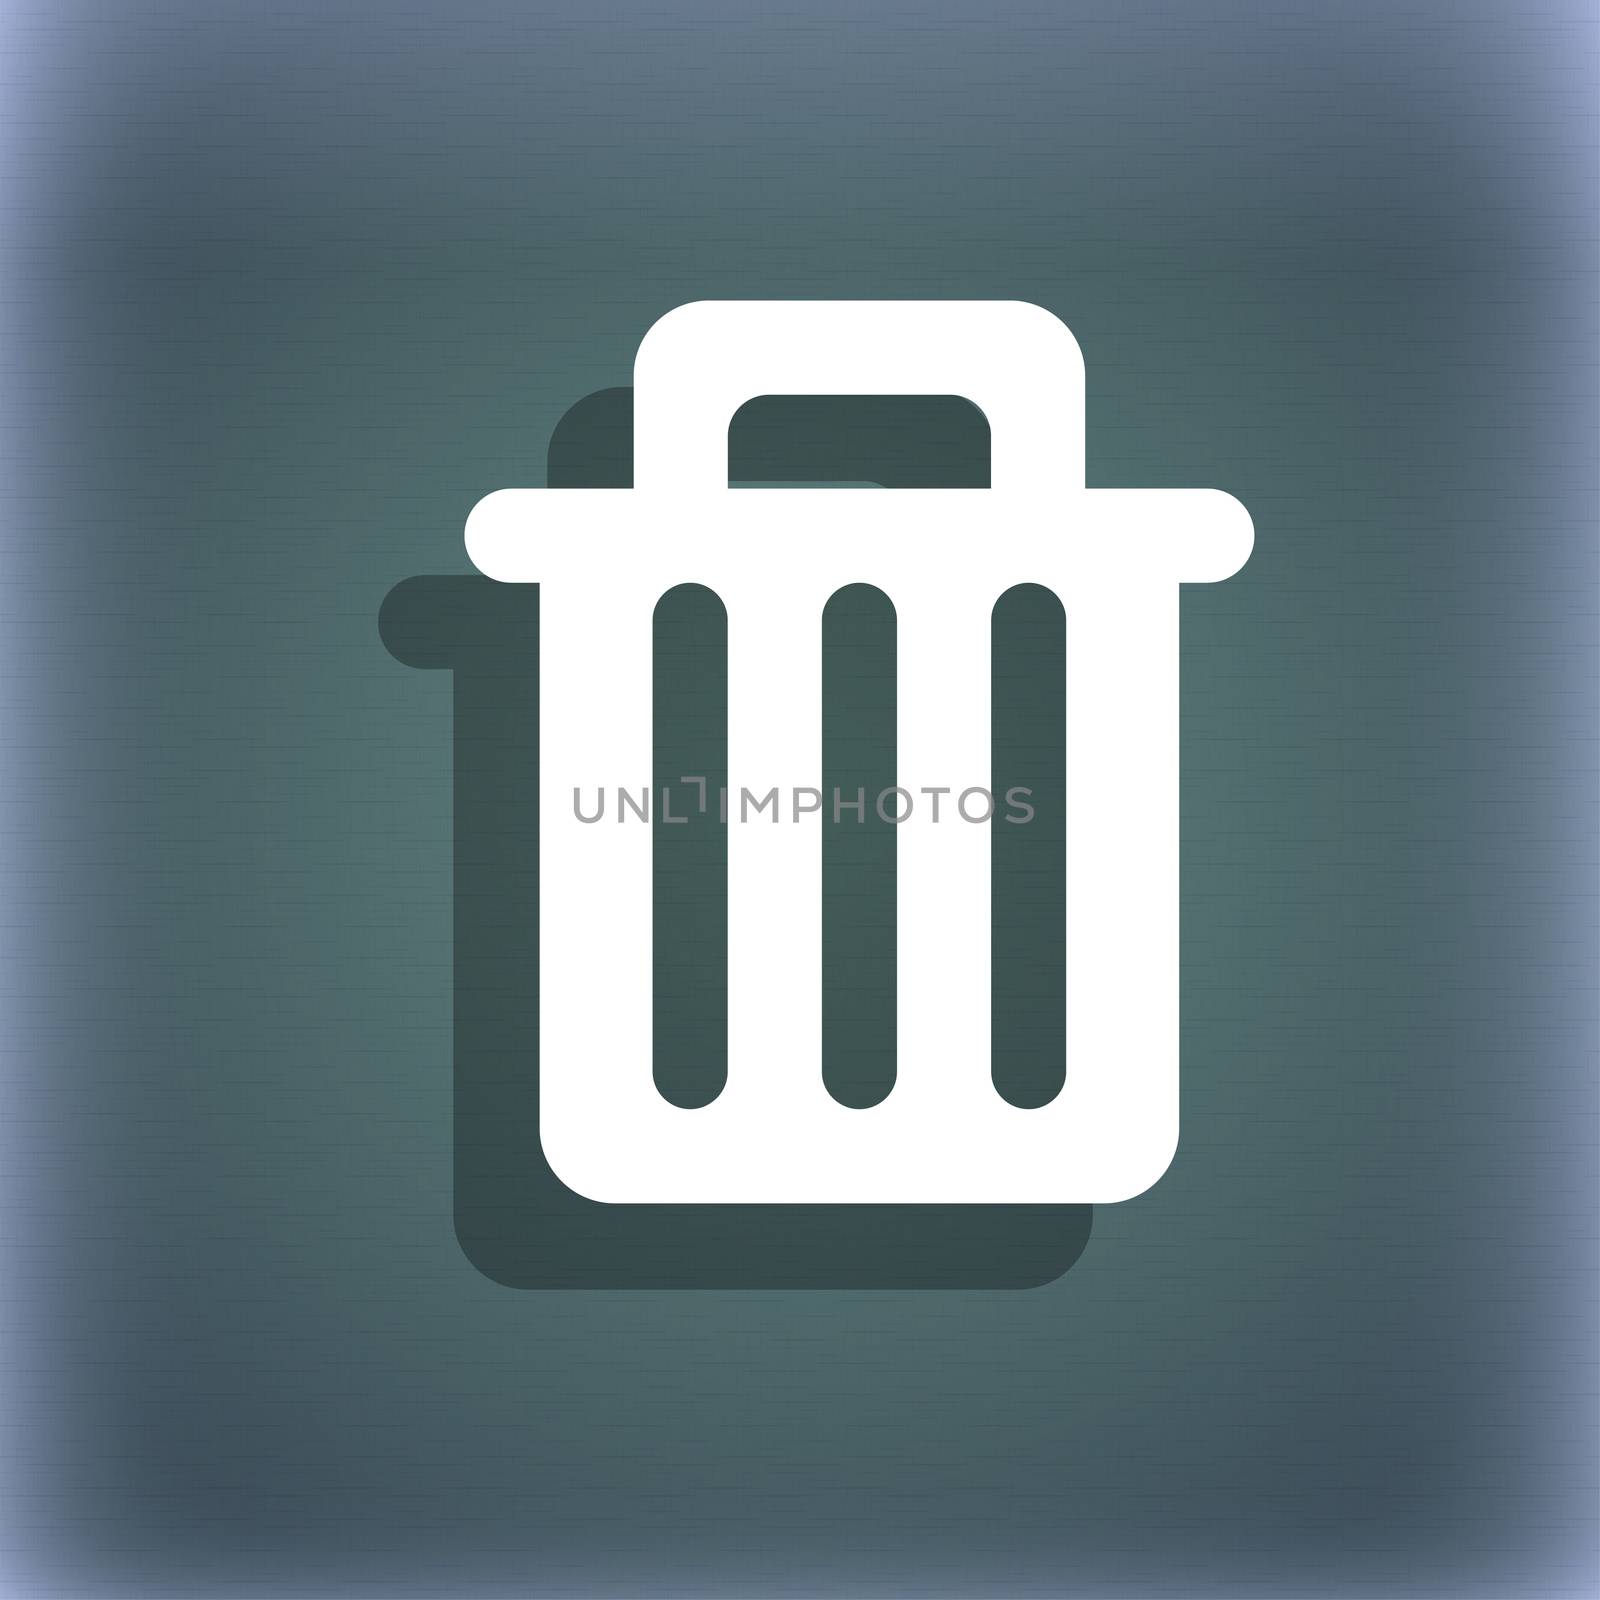 Recycle bin icon symbol on the blue-green abstract background with shadow and space for your text. illustration